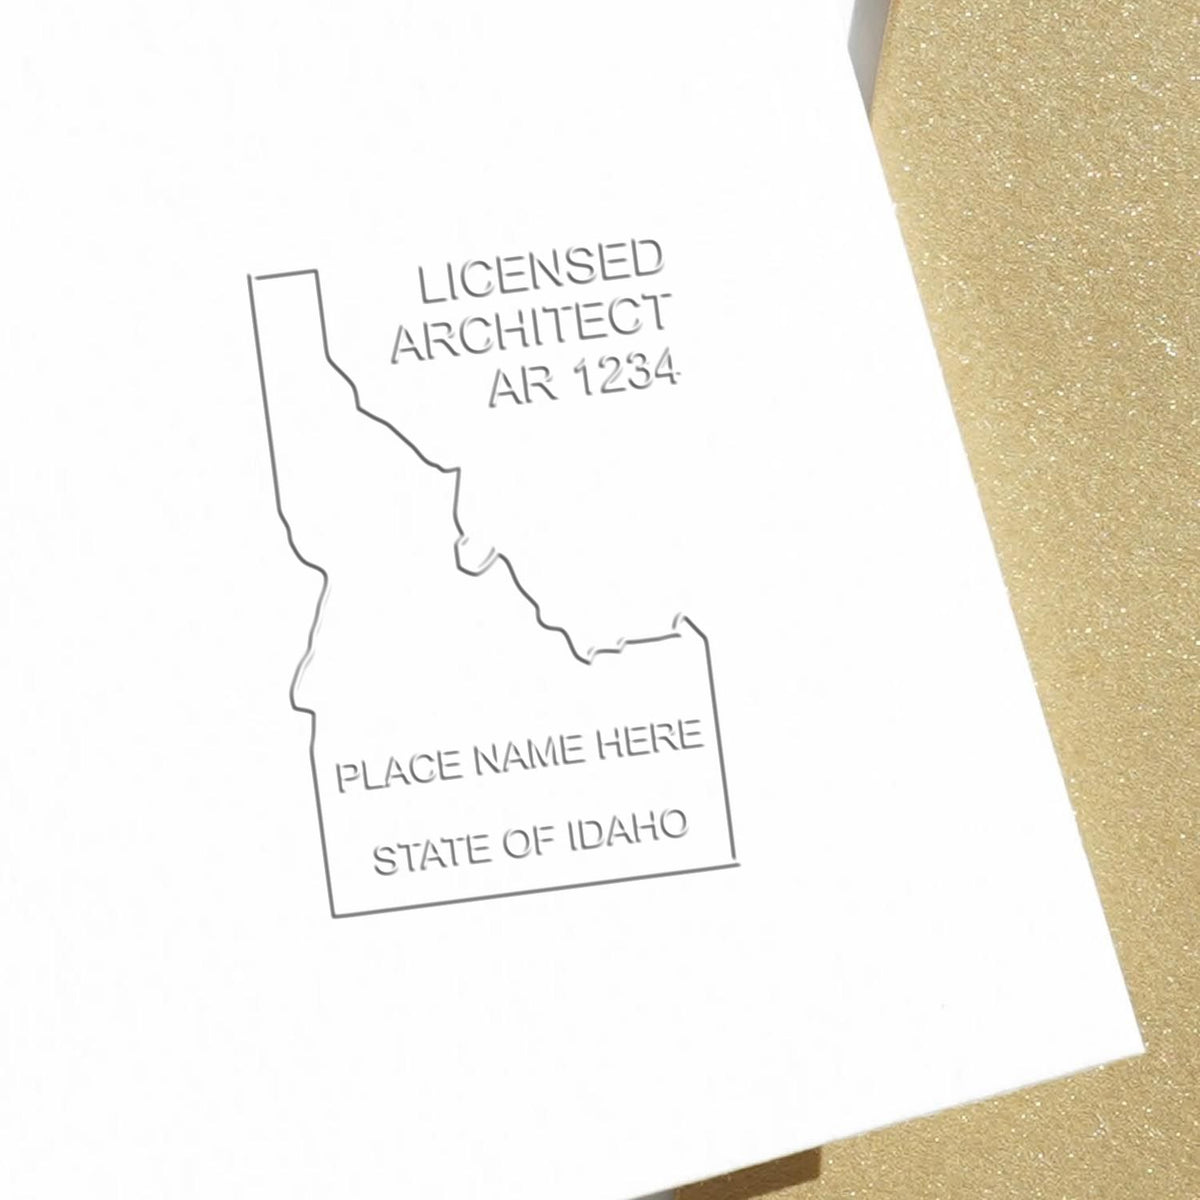 A lifestyle photo showing a stamped image of the Idaho Desk Architect Embossing Seal on a piece of paper